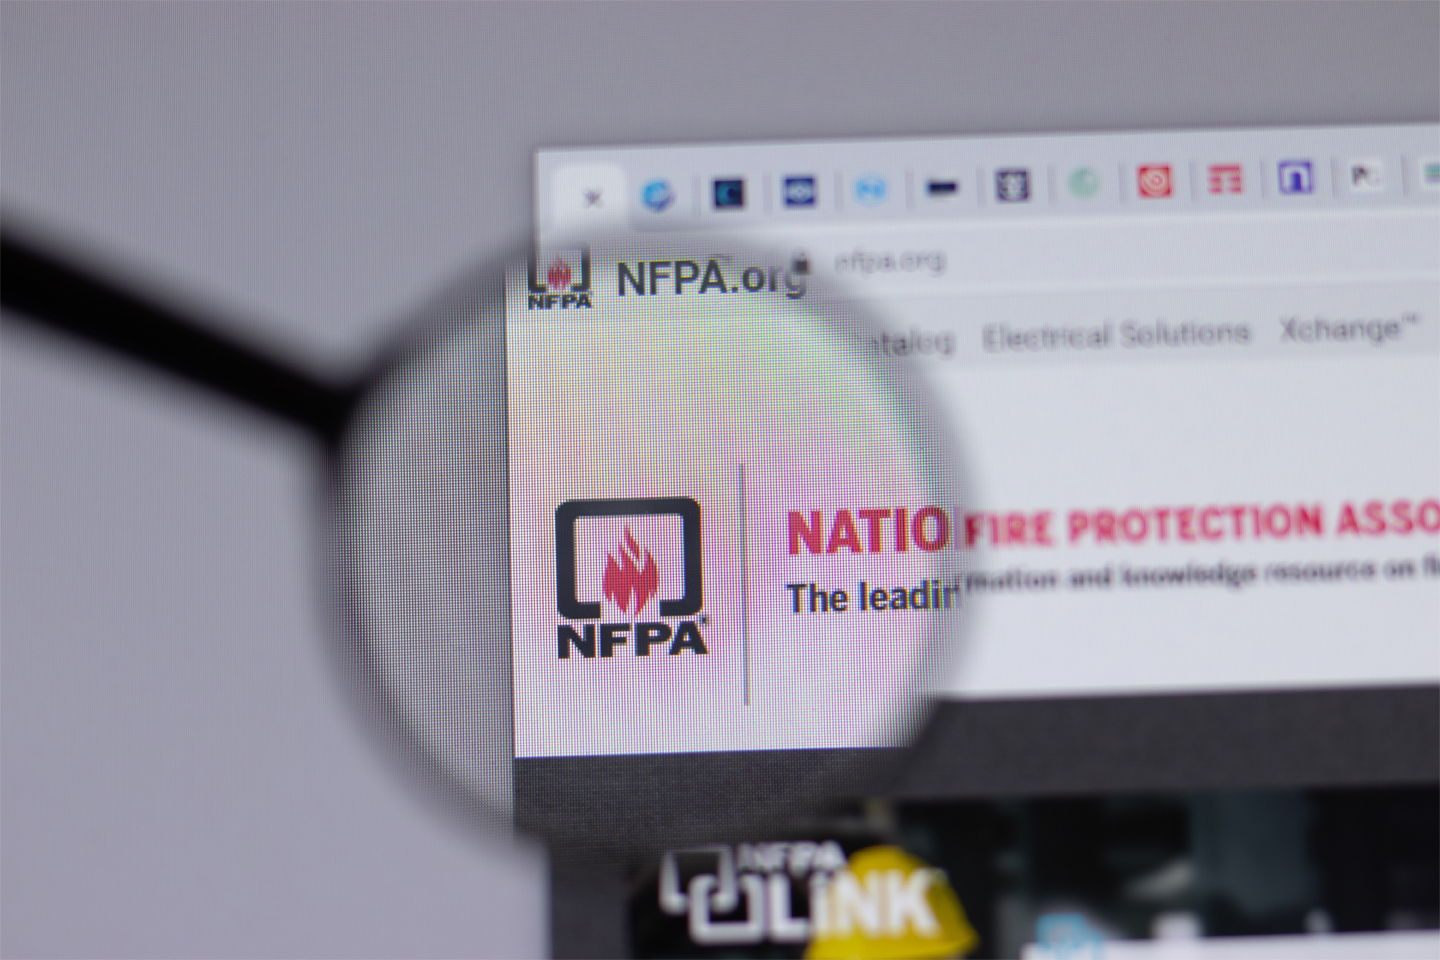 the NFPA website highlighted with a magnifying glass on an internet browser window